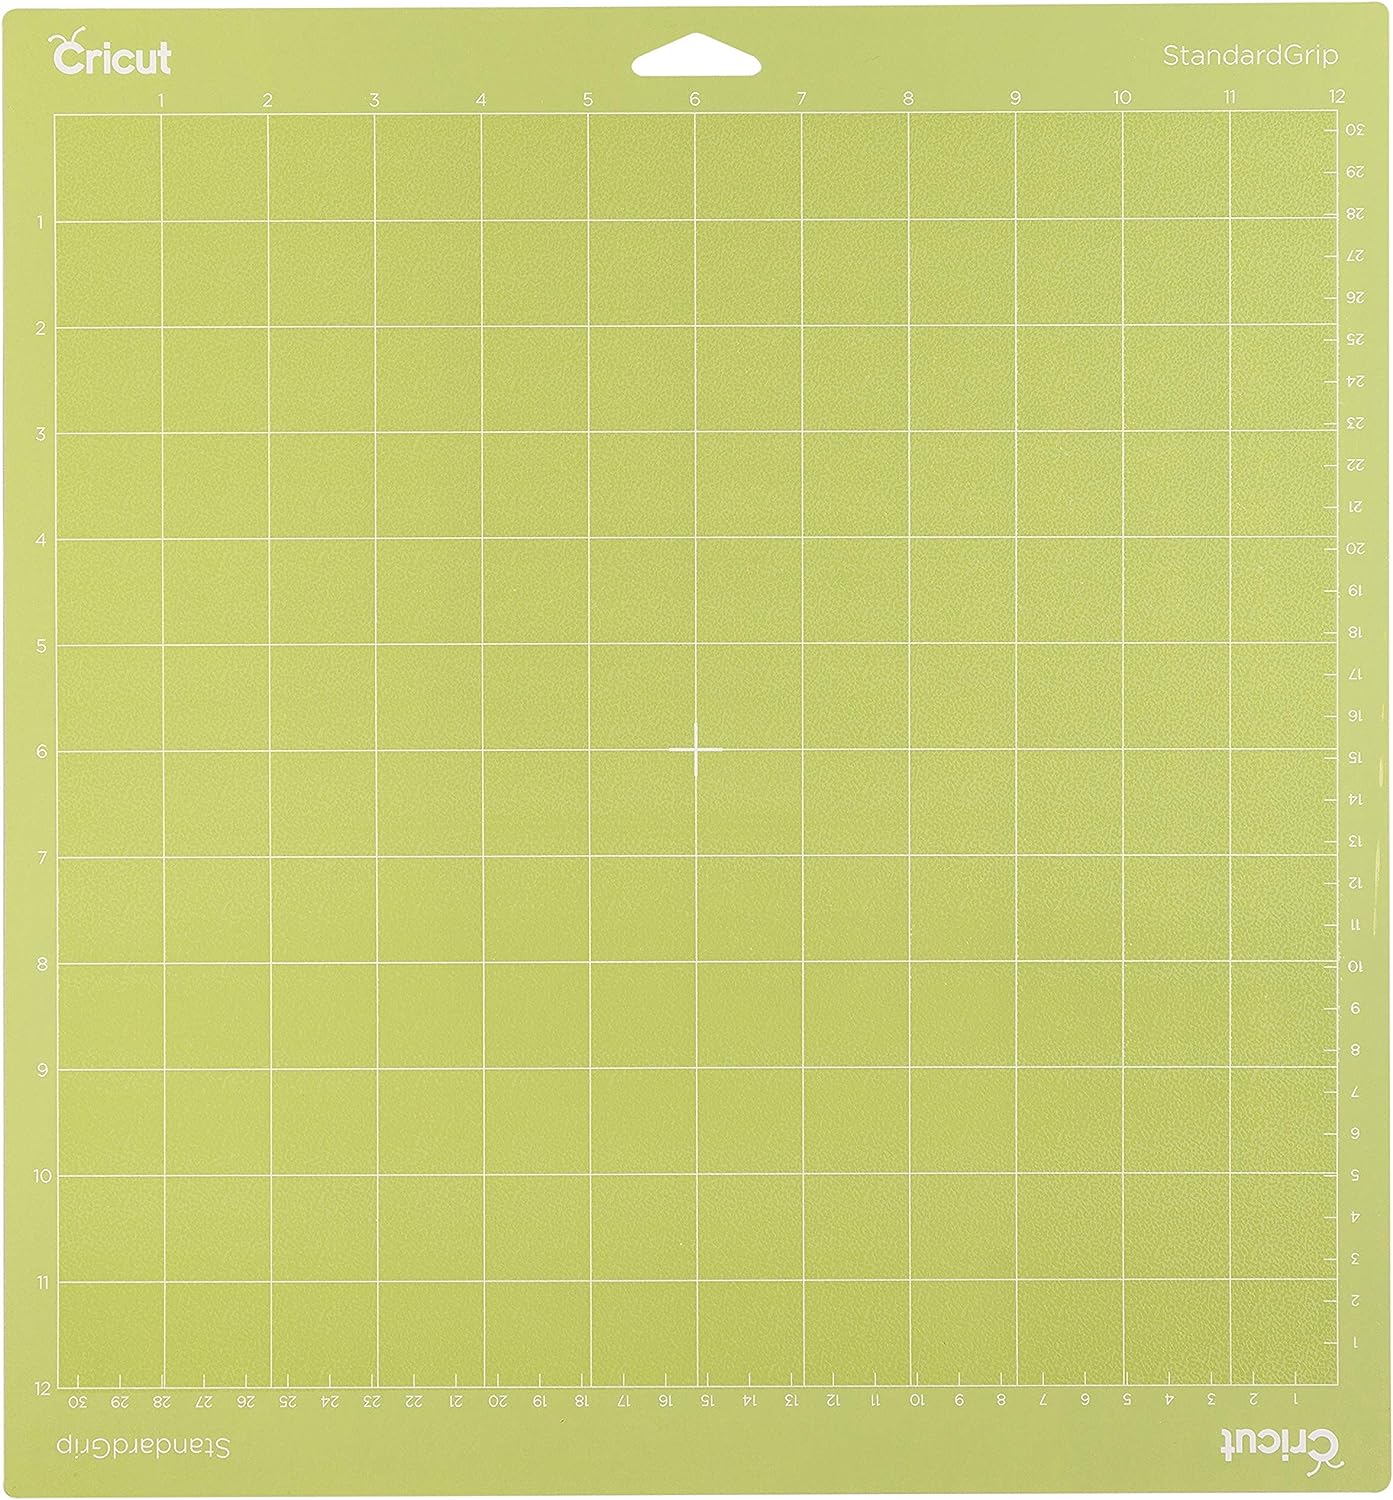 What are the different types of Cutting Mats for a Cricut Machine